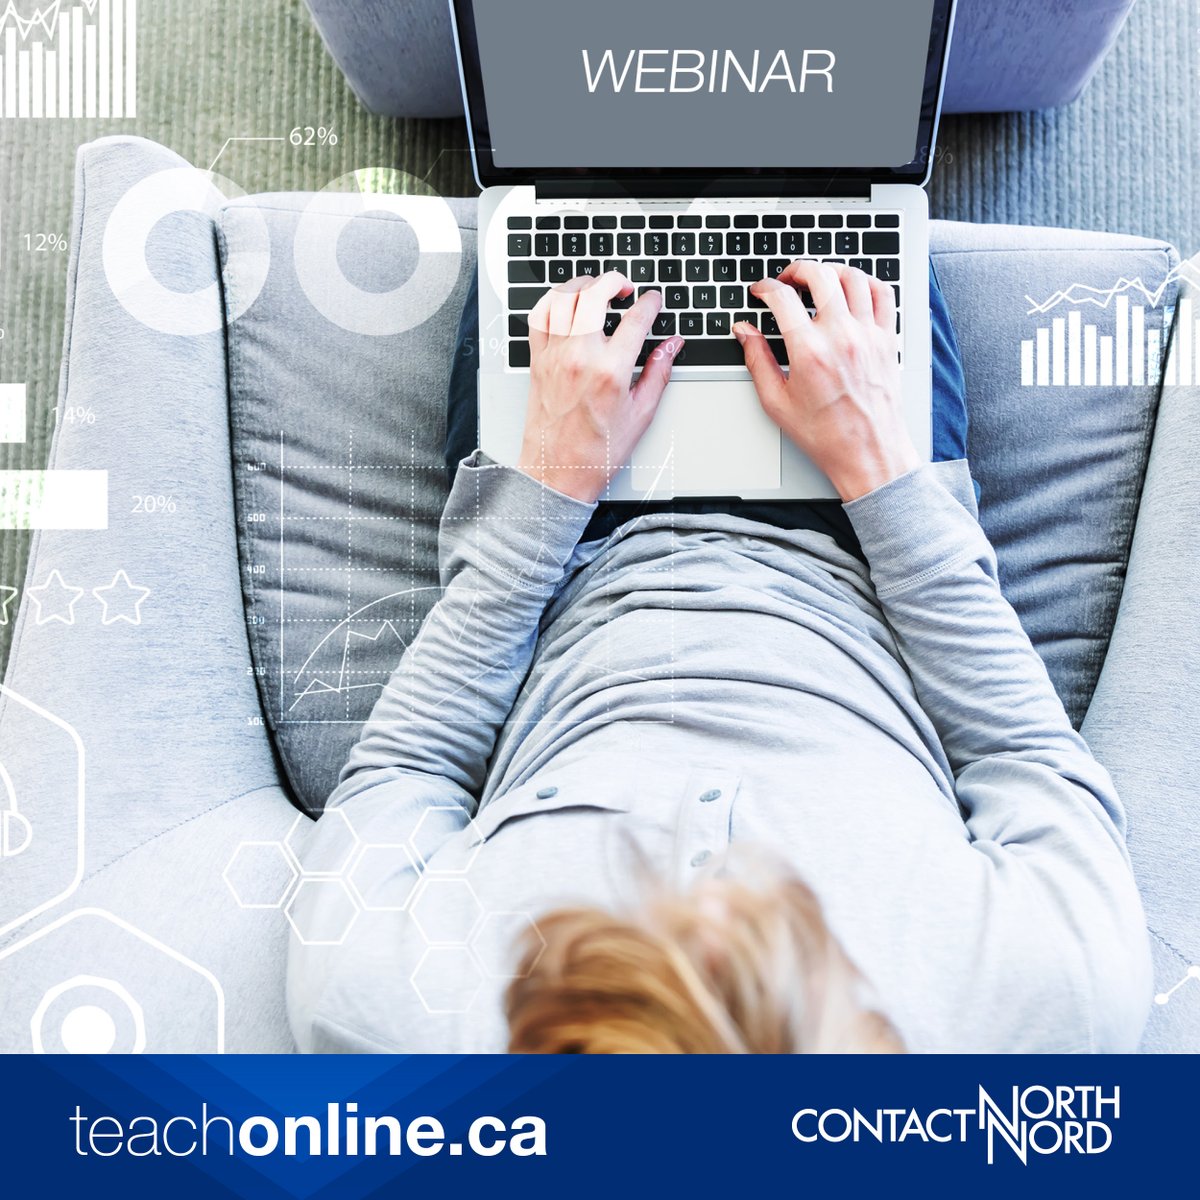 ✂️ Cut through all the hype to be the best online instructor 👨‍🏫🖥️ your students have ever had. Get the latest on #AI in higher education, teaching tips & tricks, and more. Join our free #webinars live or on demand at teachonline.ca/webinars #EducationWebinars #FreeWebinar